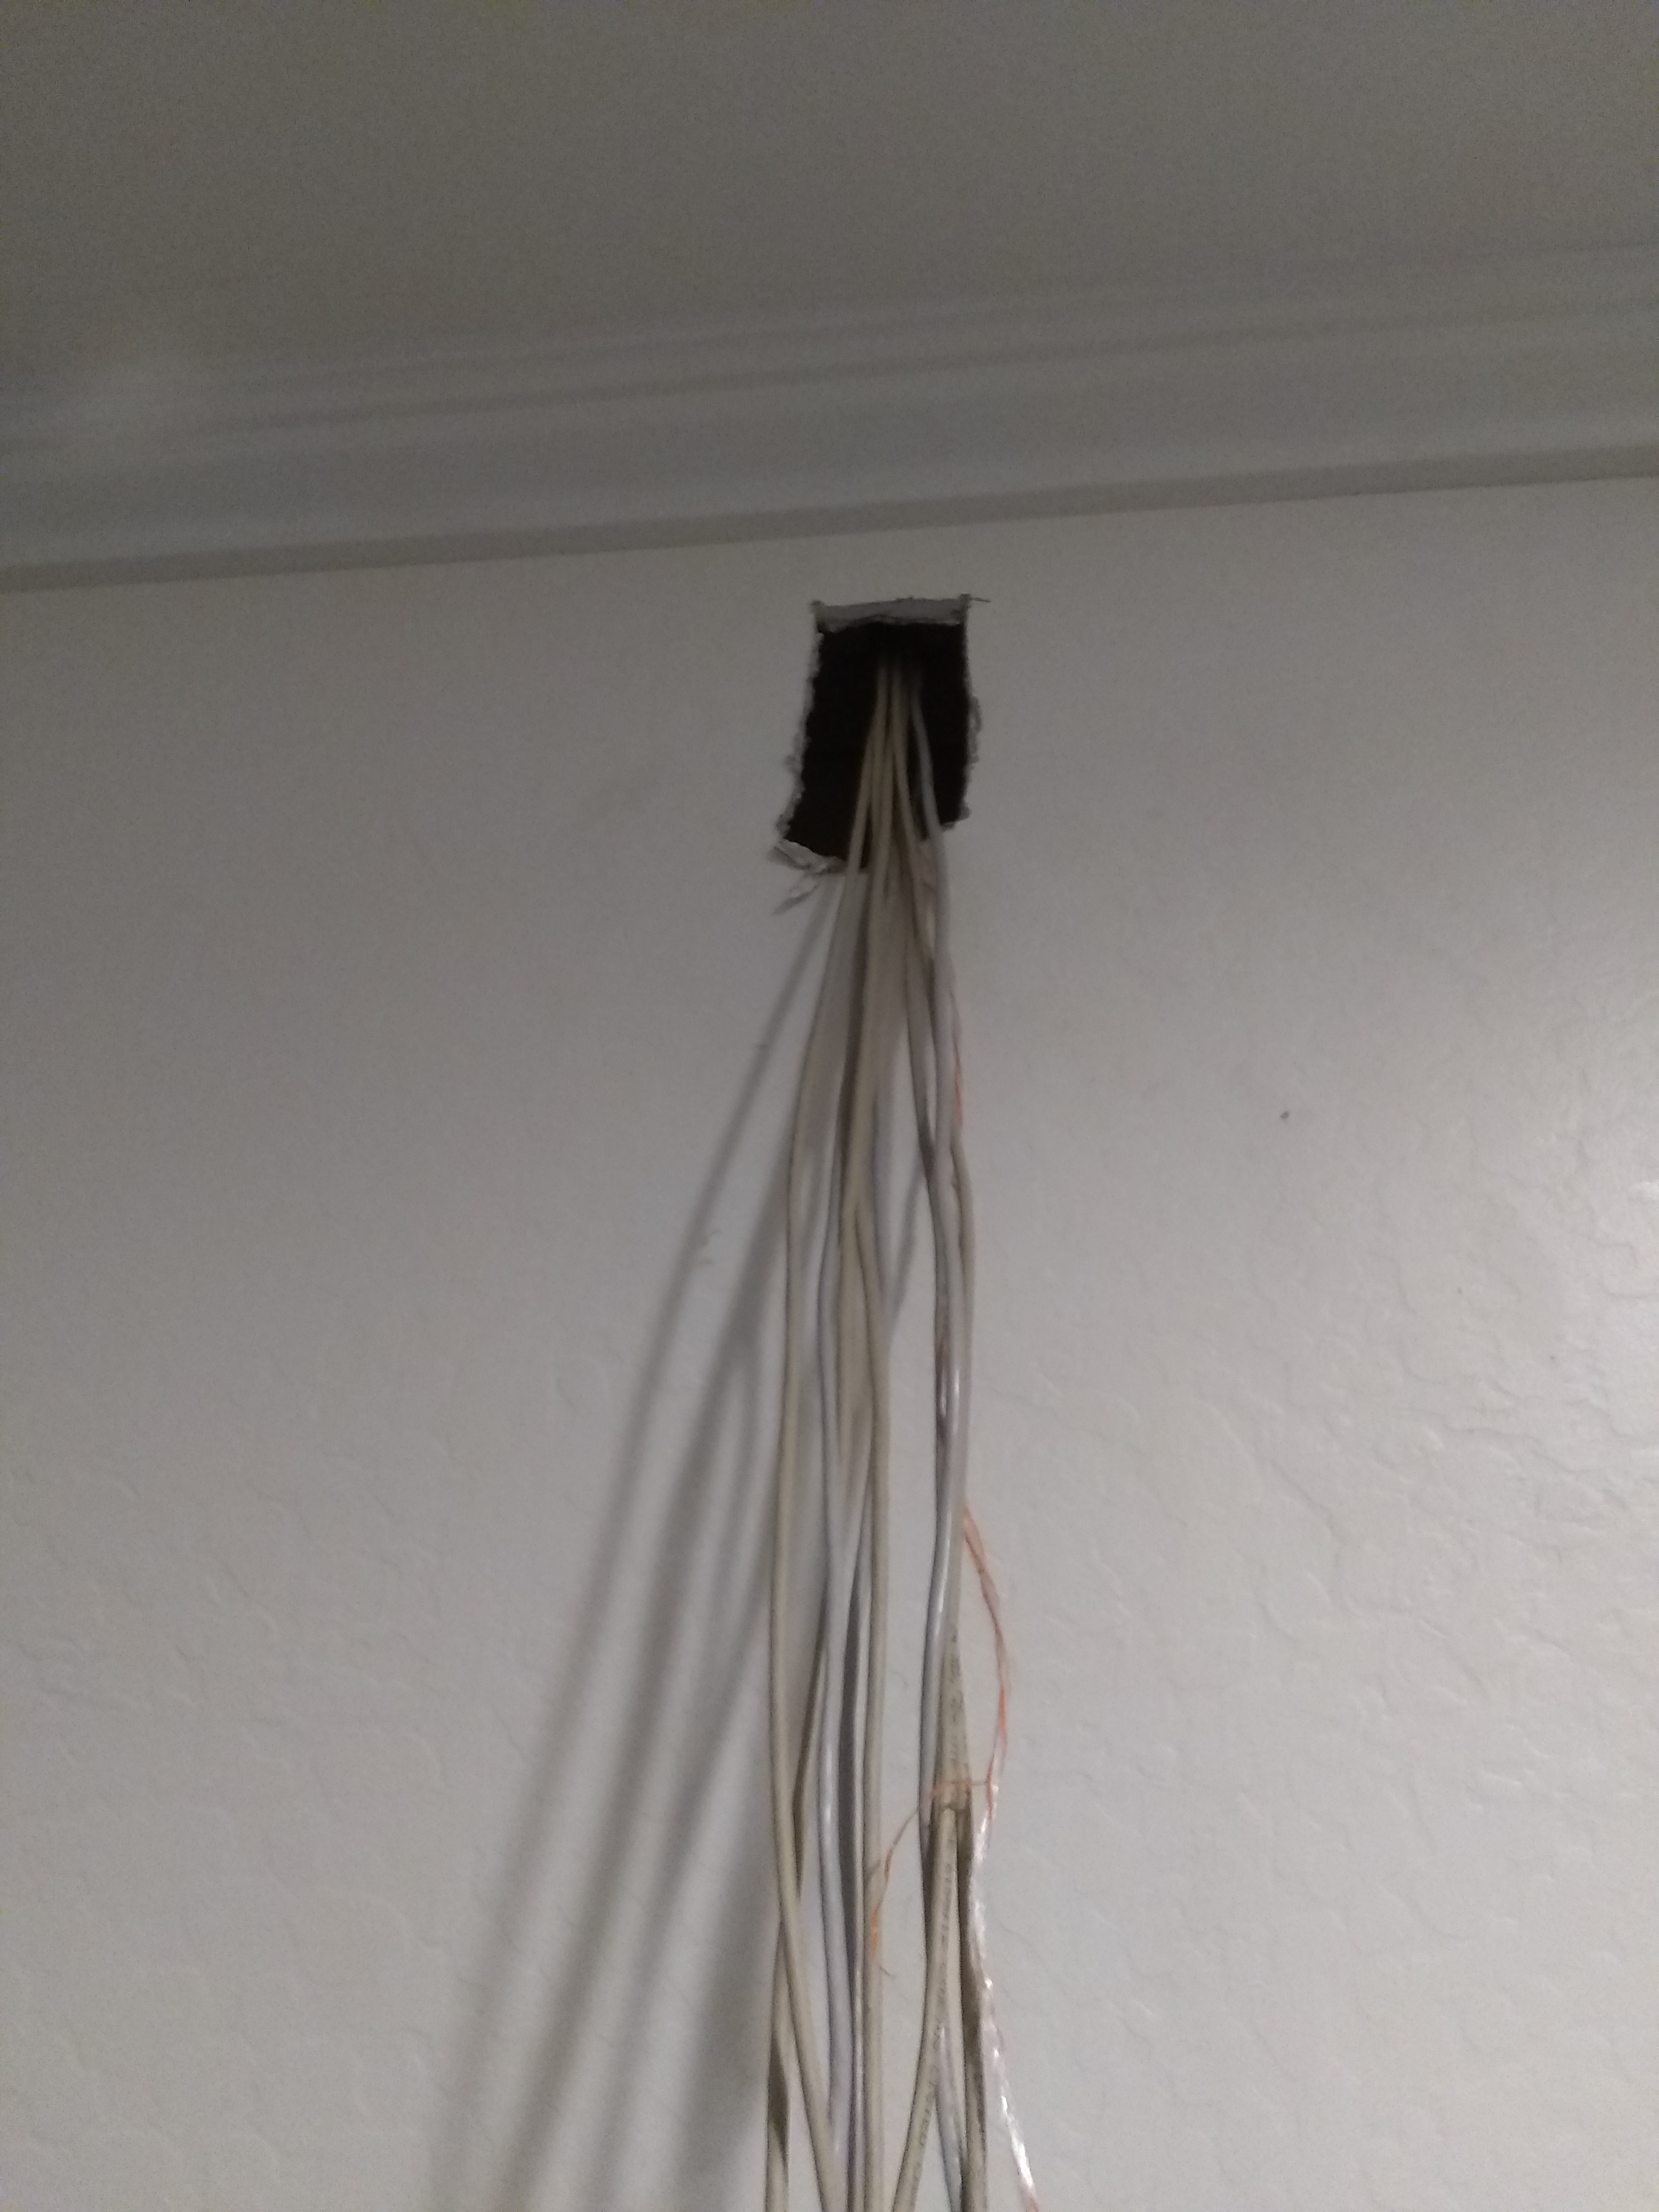 Top of Wall cables where fished thru